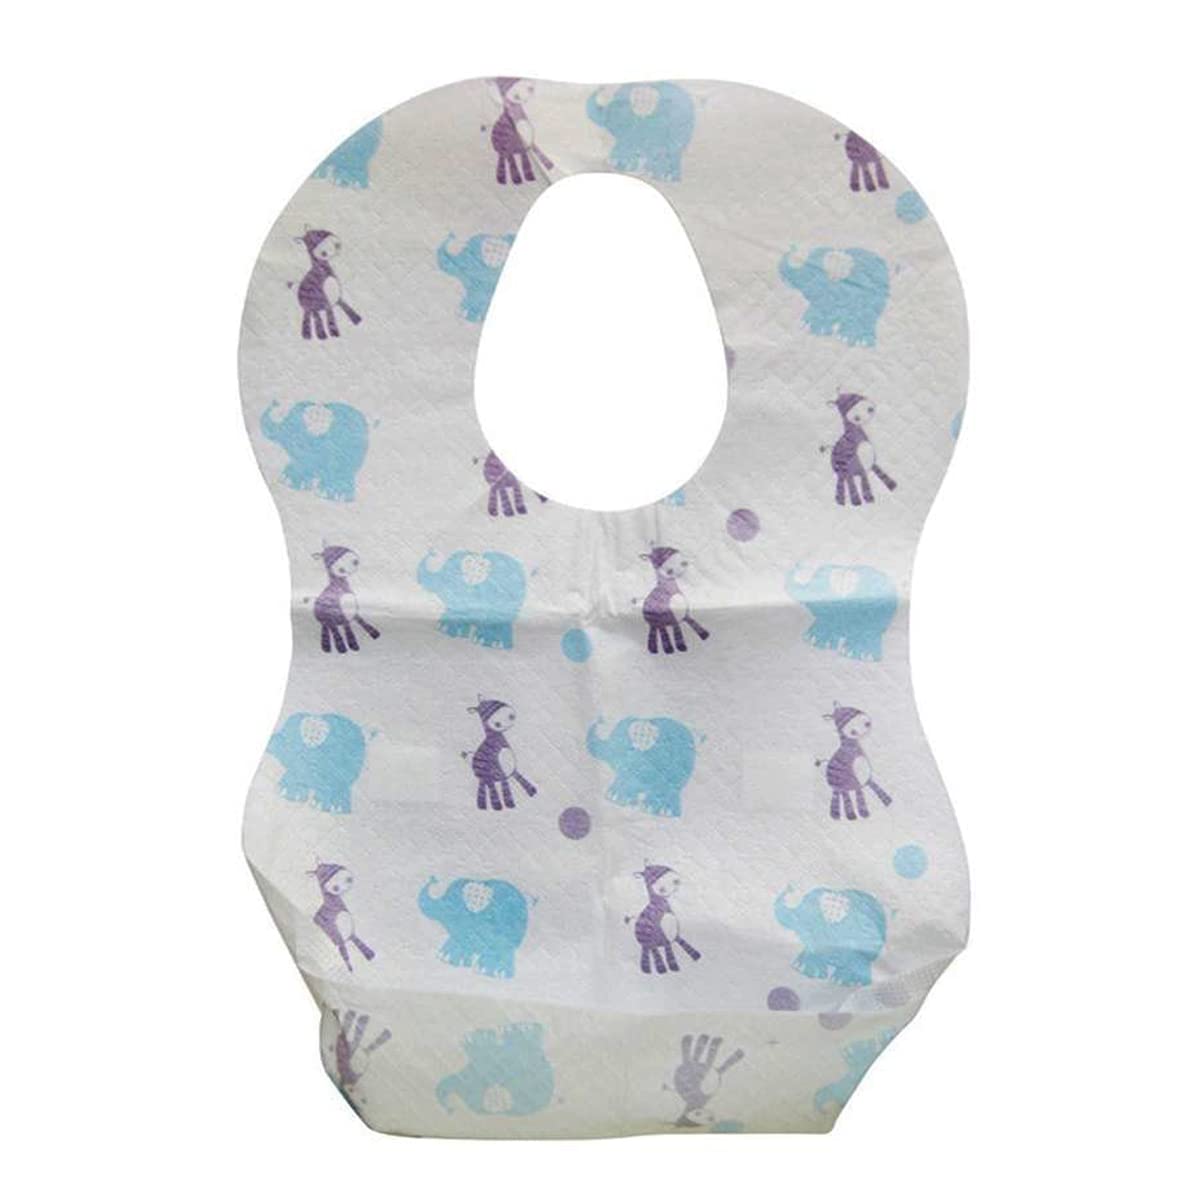 Baby Disposable Bibs with Crumb Catcher -Pack of 20